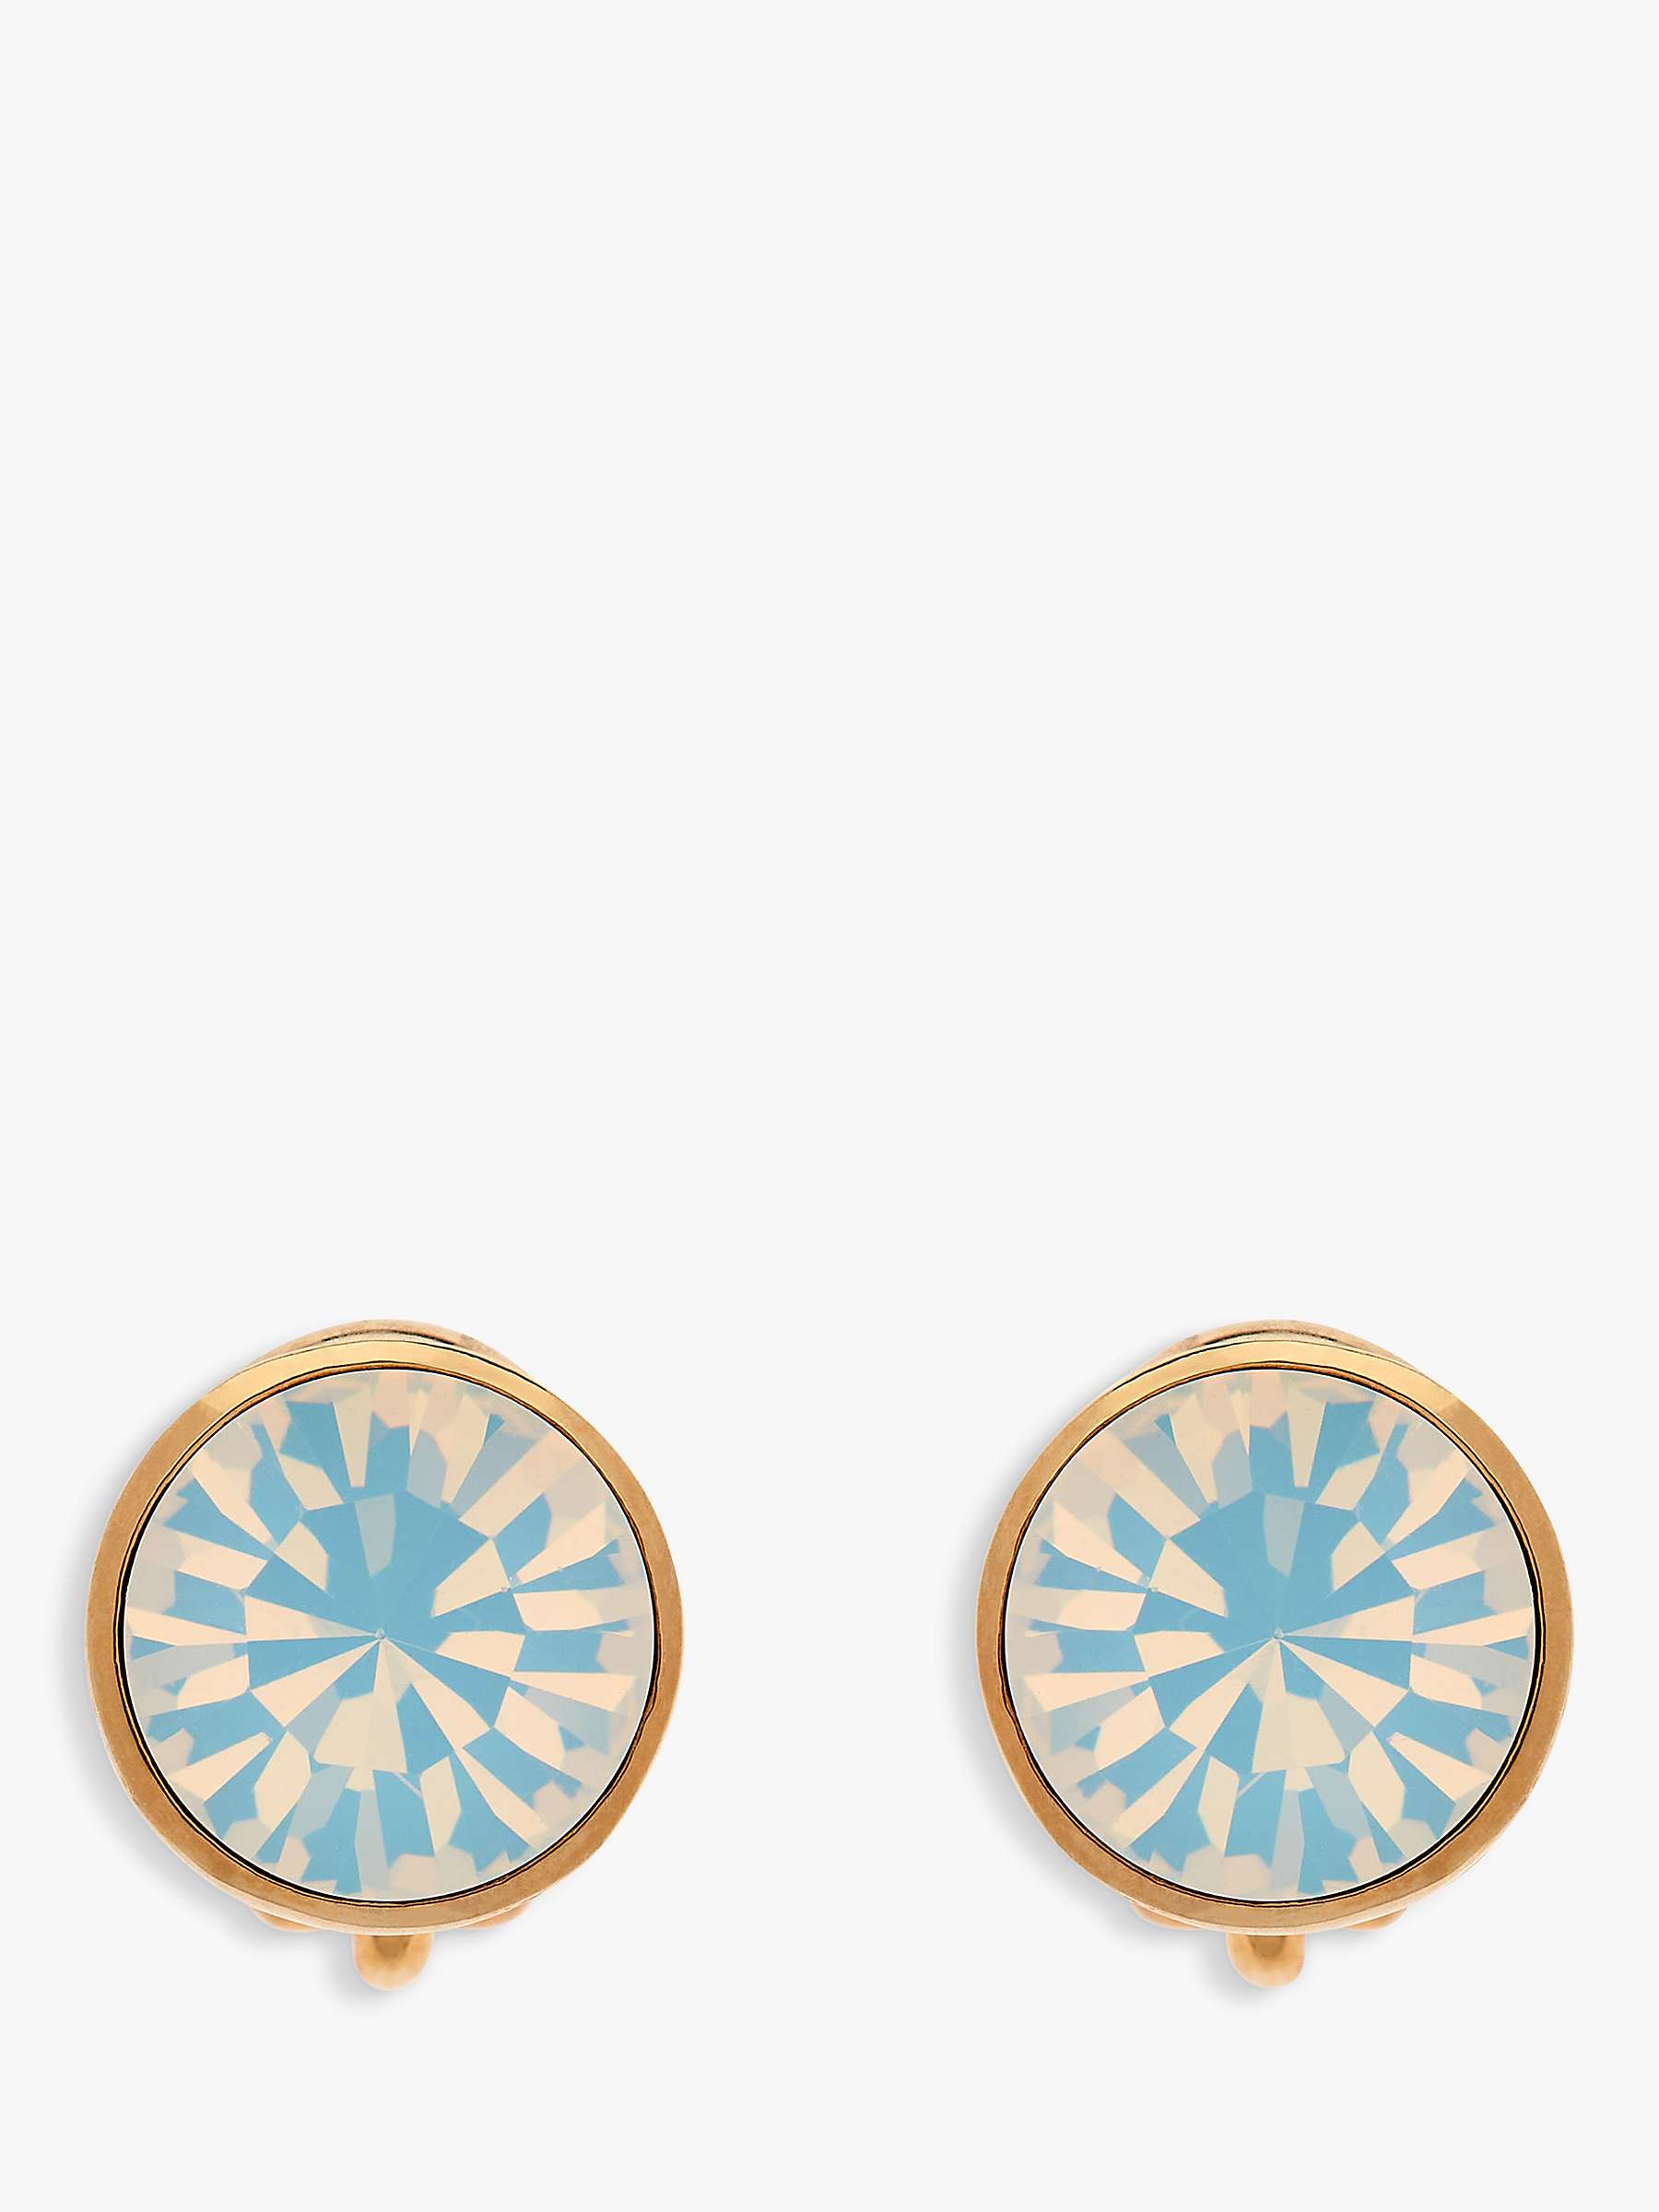 Buy Emma Holland Opal Crystal Clip-On Earrings, Gold Online at johnlewis.com